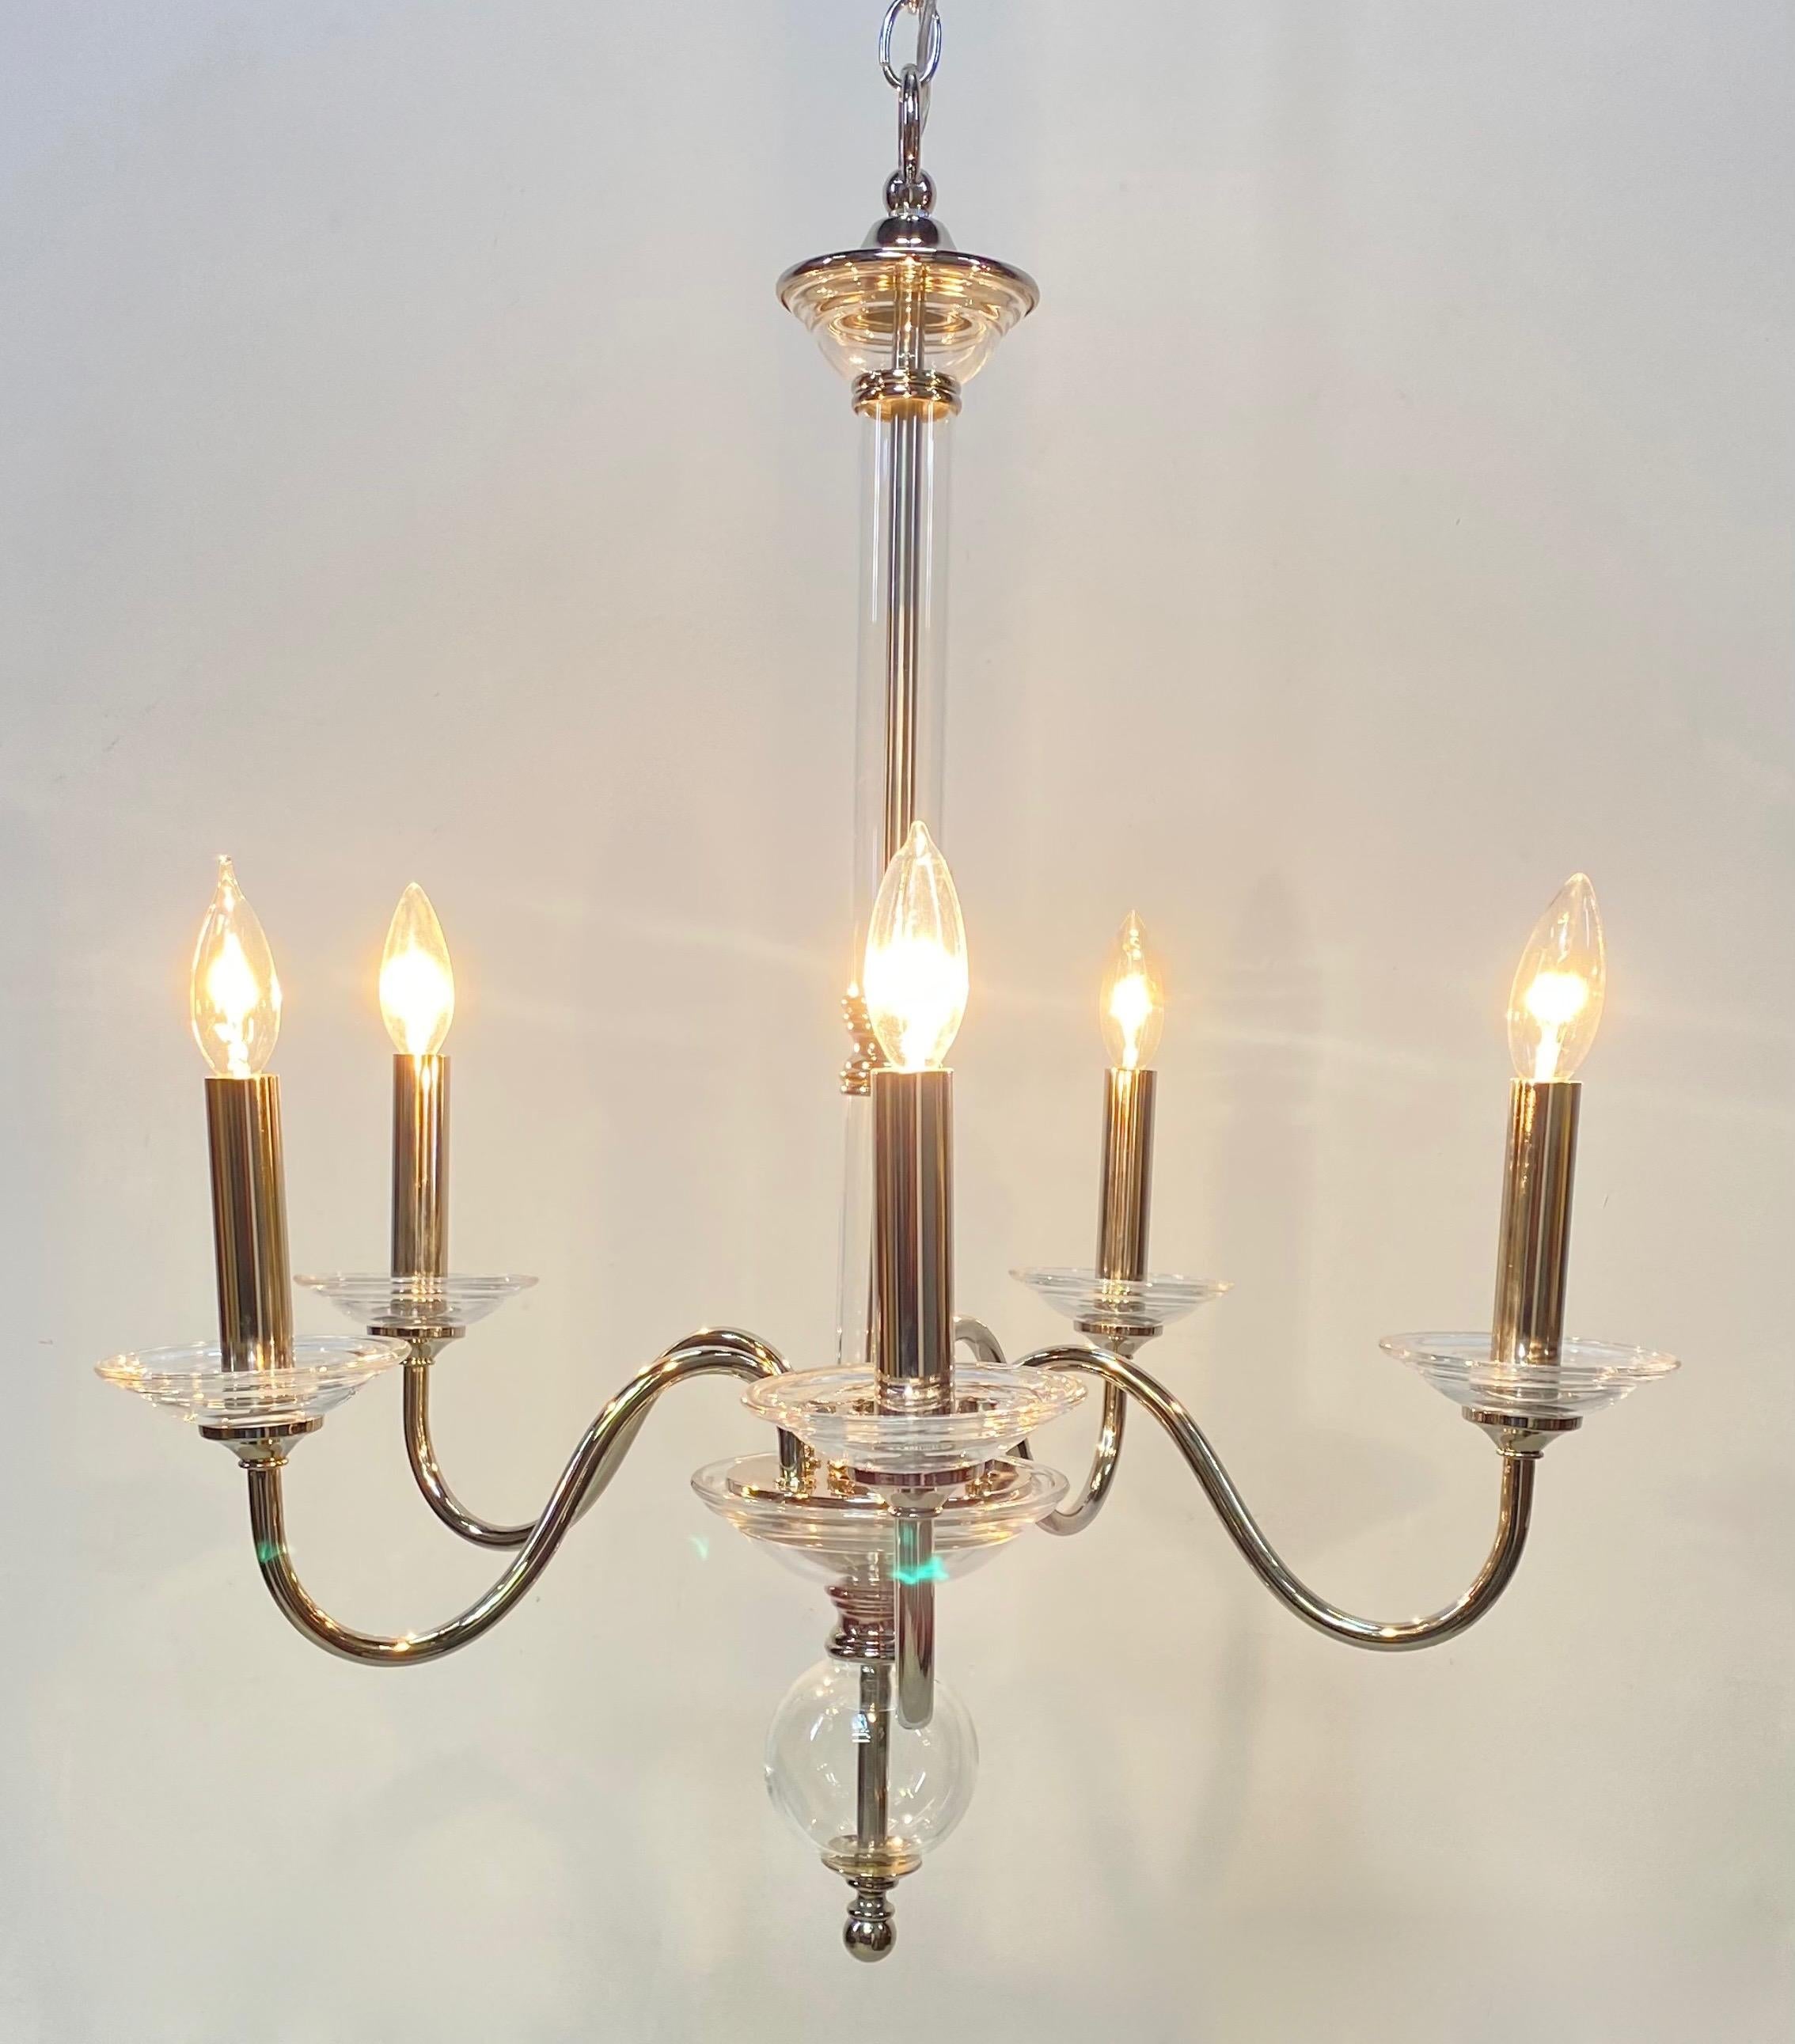 A very high quality sleek modern style chrome and glass 5-arm ceiling light fixture.
Newly re-wired.
American, mid 20th century.
We can shorten the length of the chain to the buyers specifications.
Measurement of fixture without chain 29.5 inch high